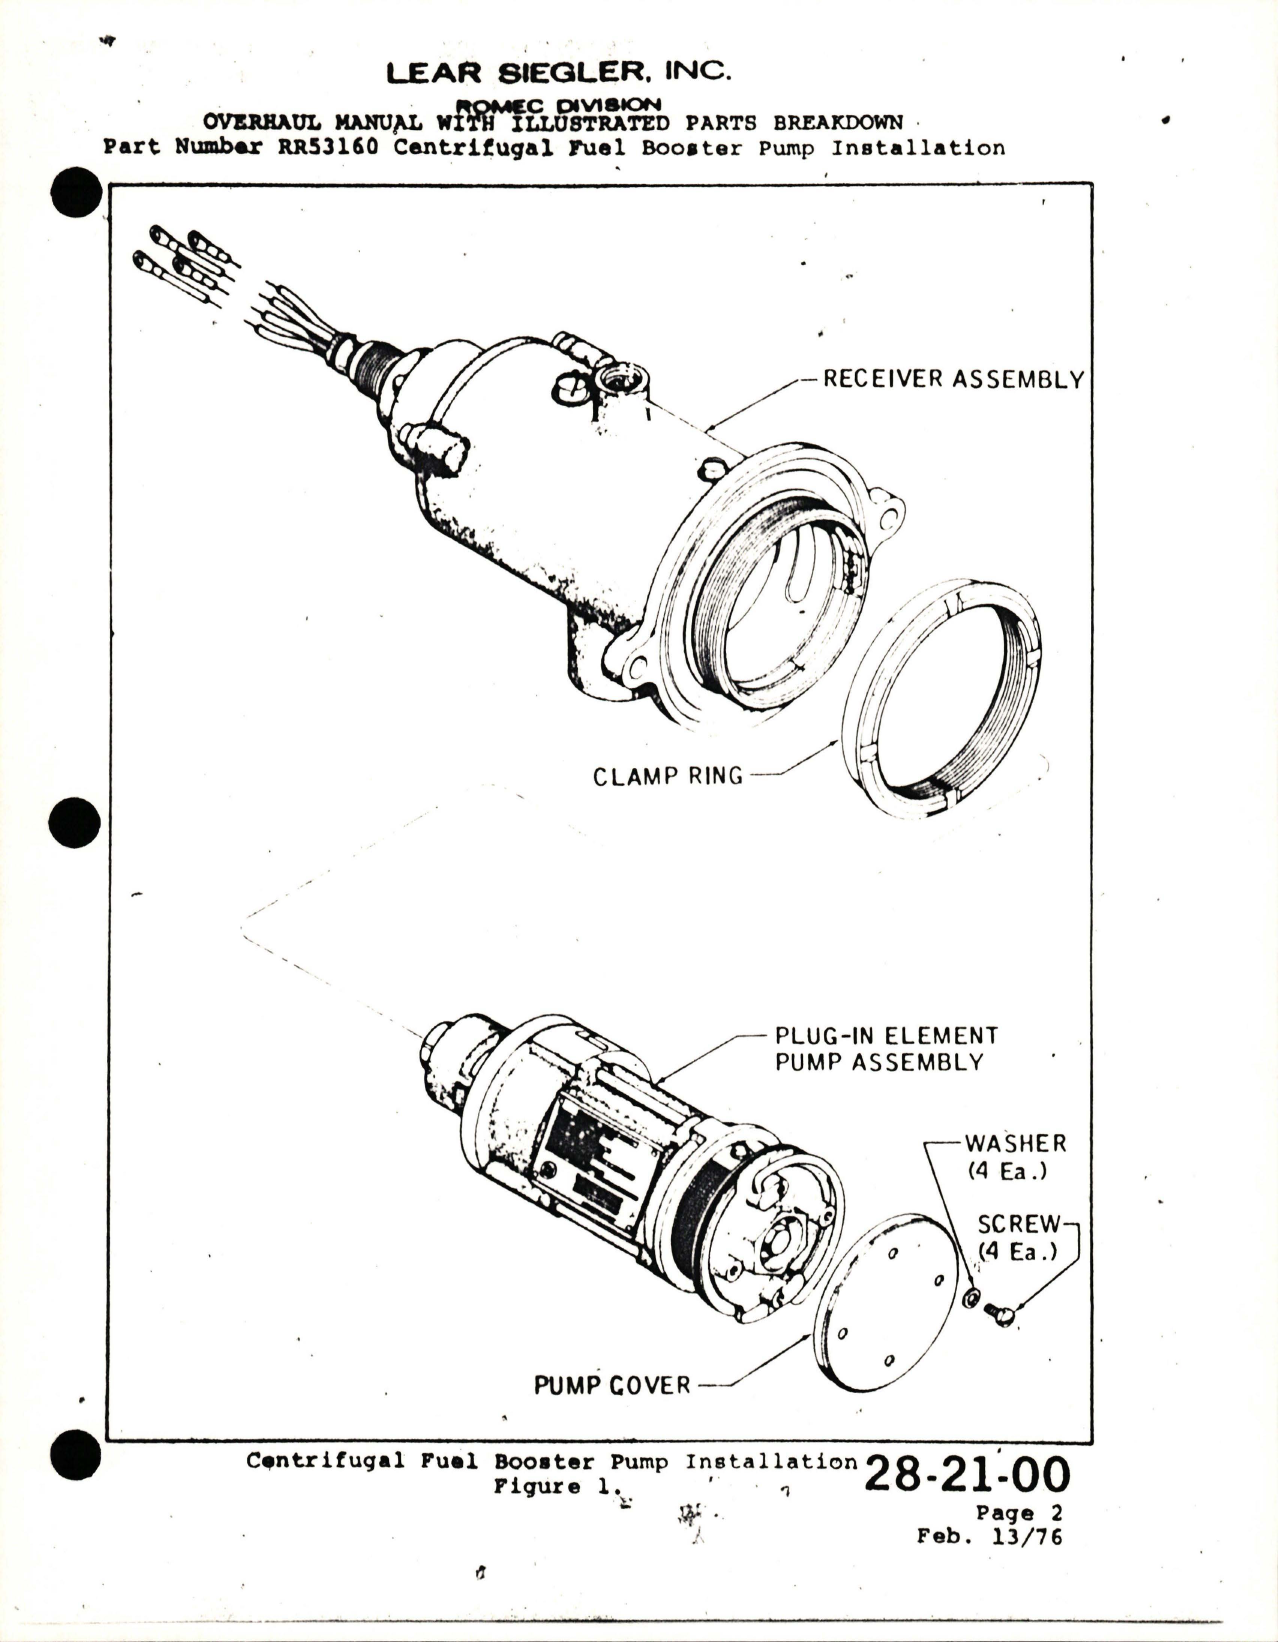 Sample page 7 from AirCorps Library document: Maintenance Manual for Centrifugal Fuel Booster Pump Installation - Series RR53160 